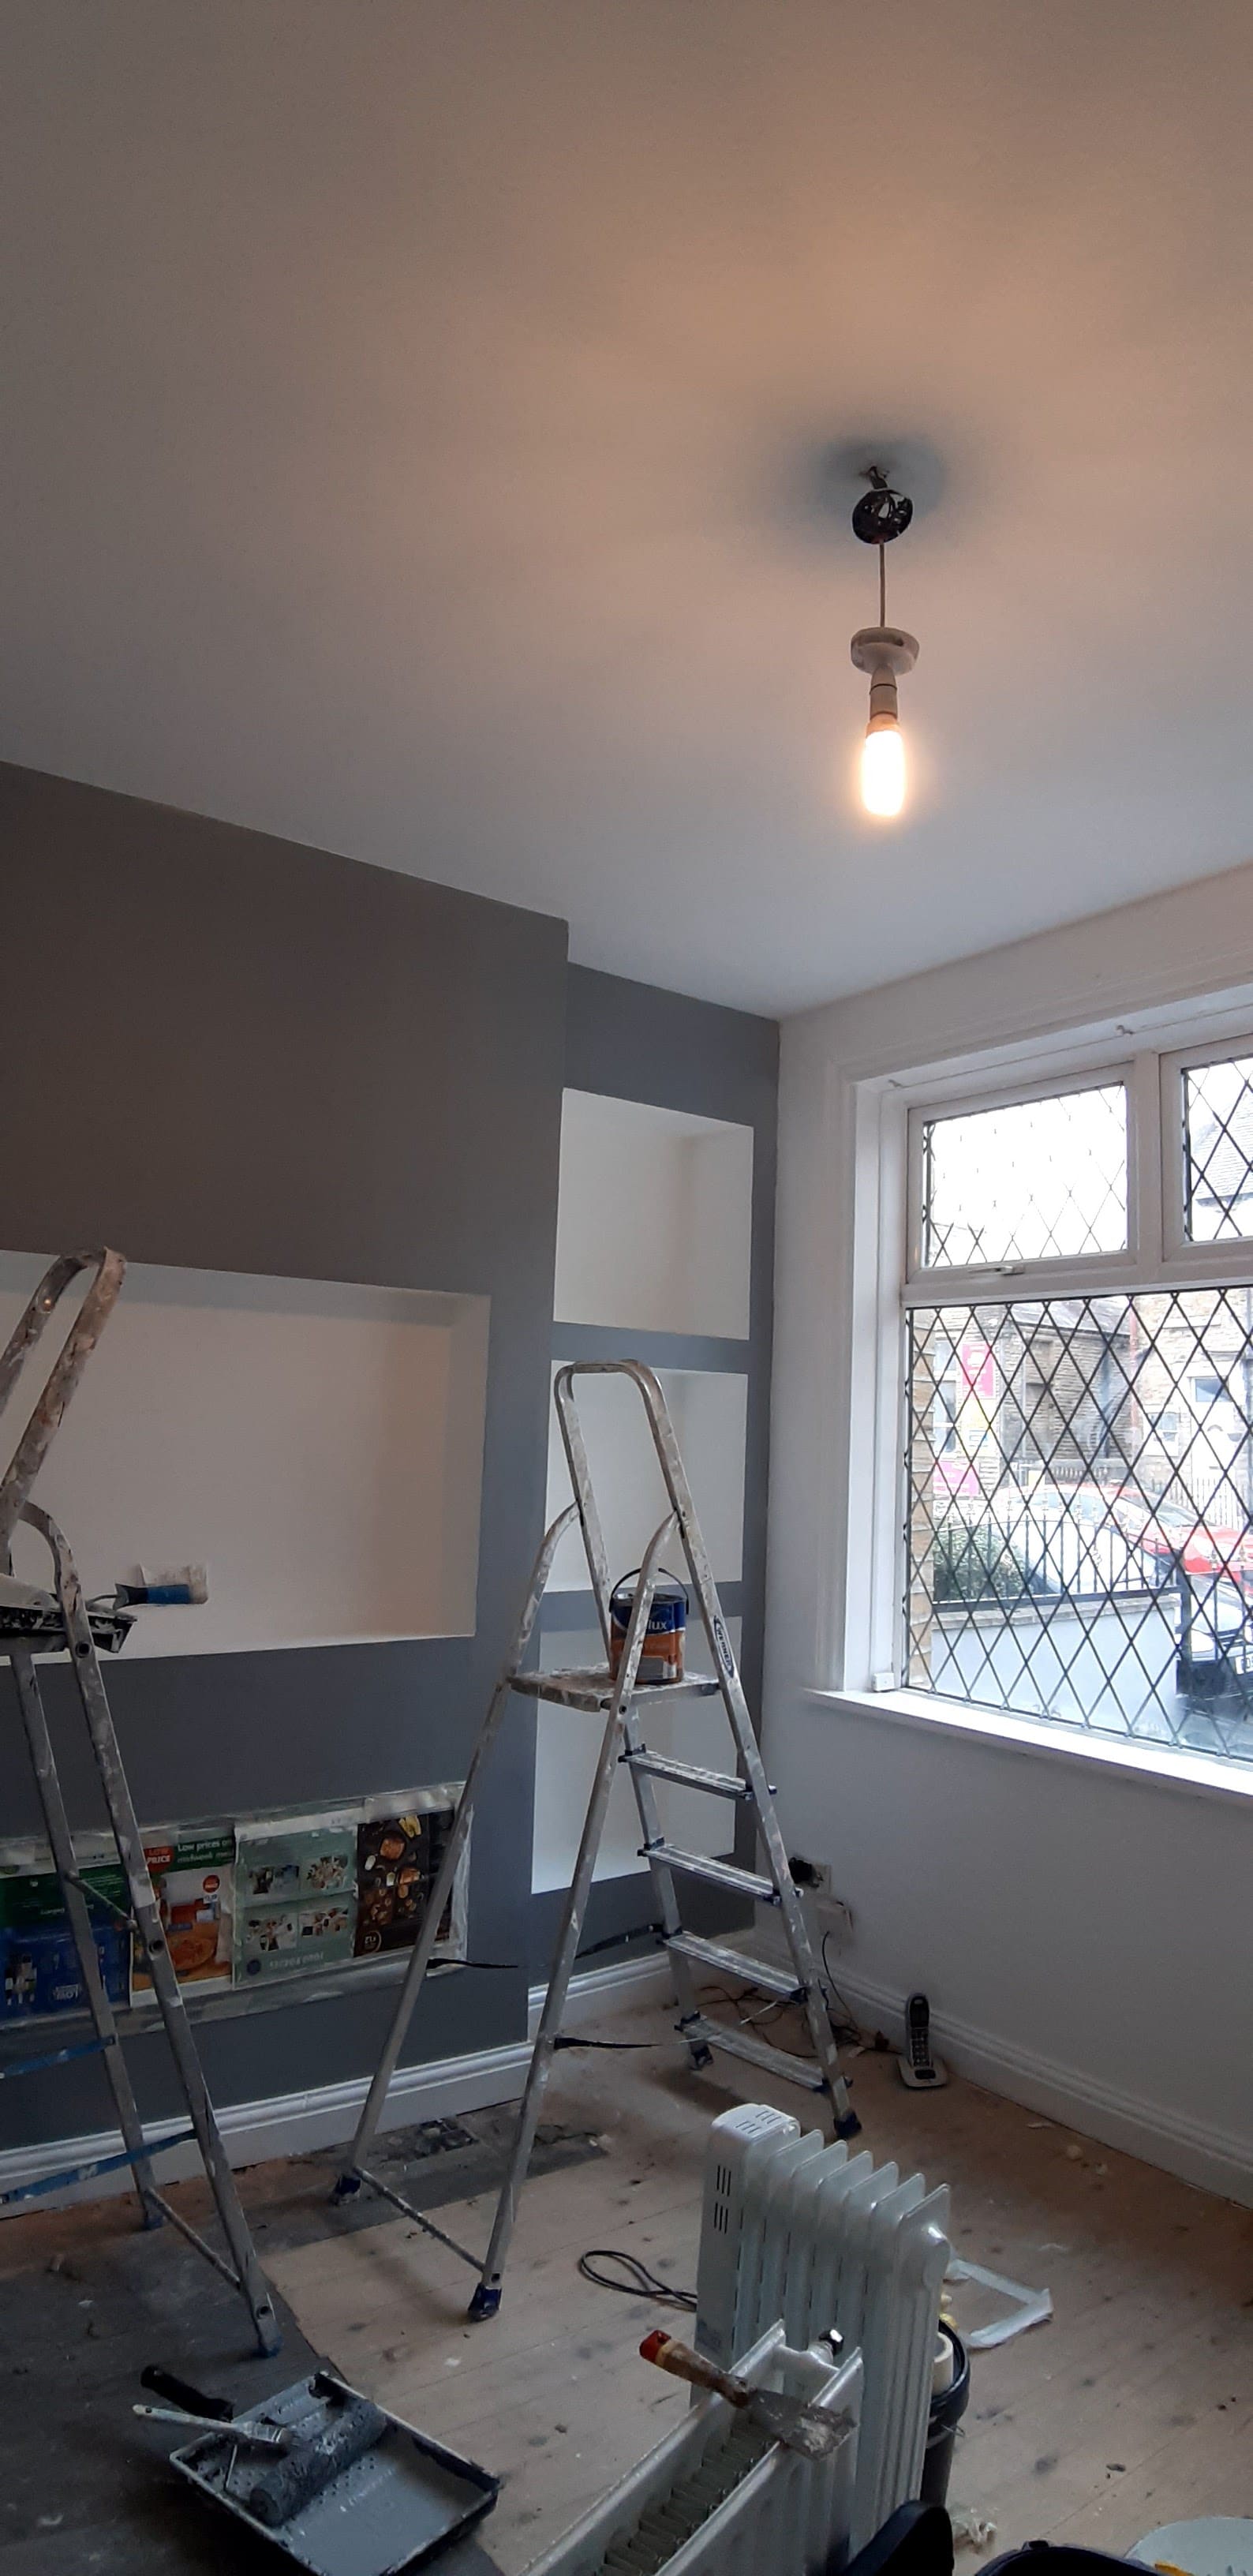 New Look Painting Services - Bradford, UK, best glitter paint for walls